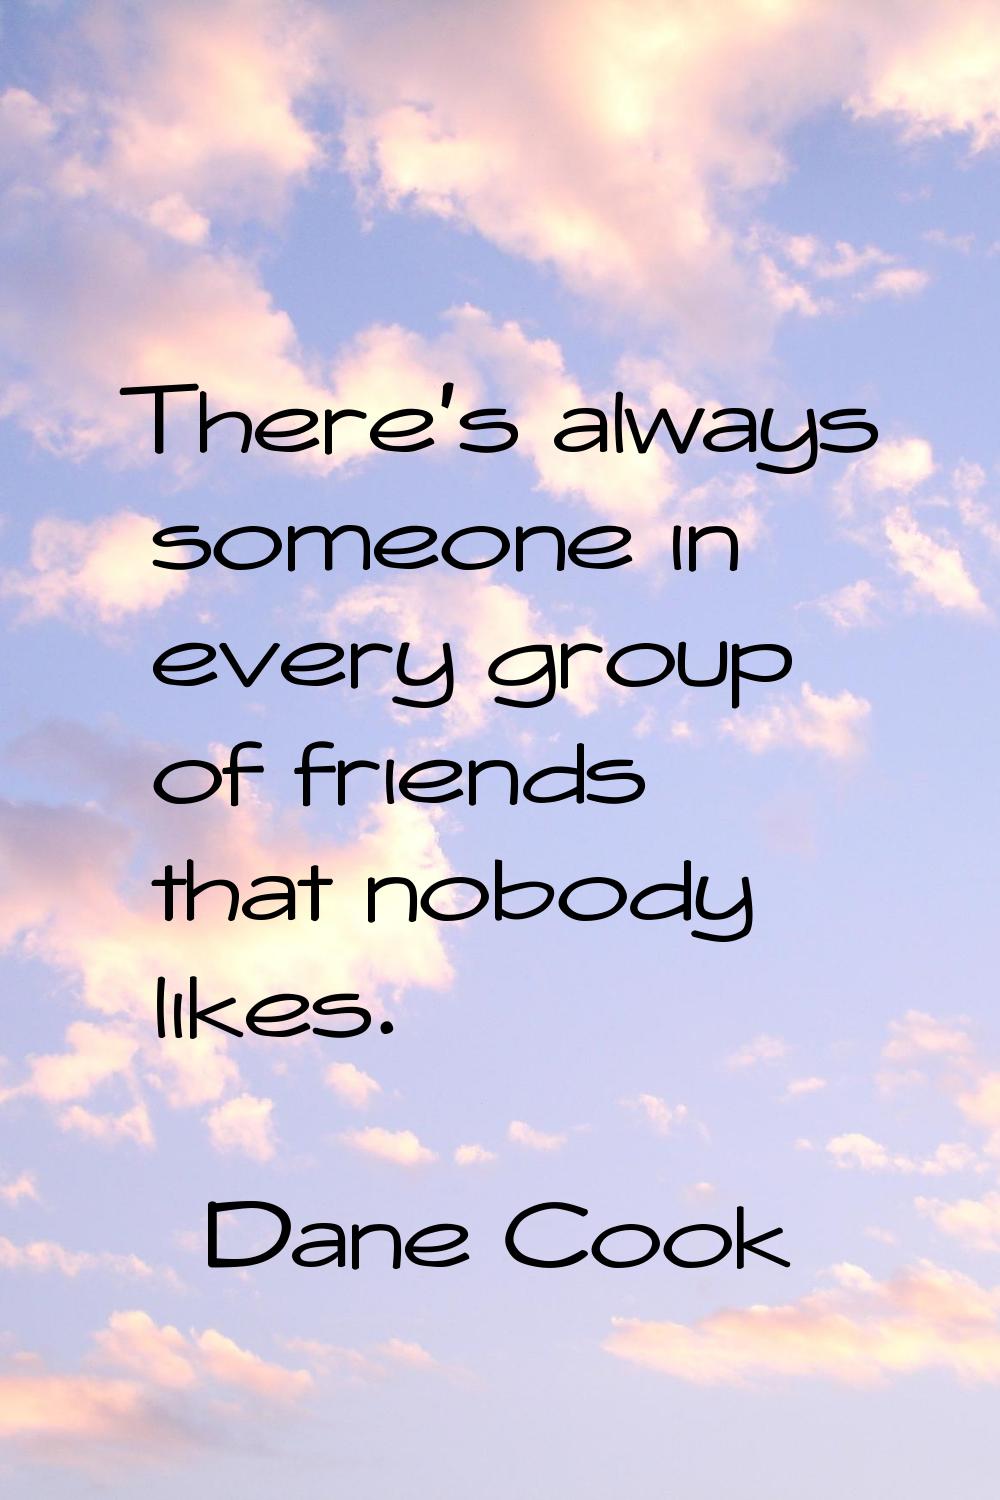 There's always someone in every group of friends that nobody likes.